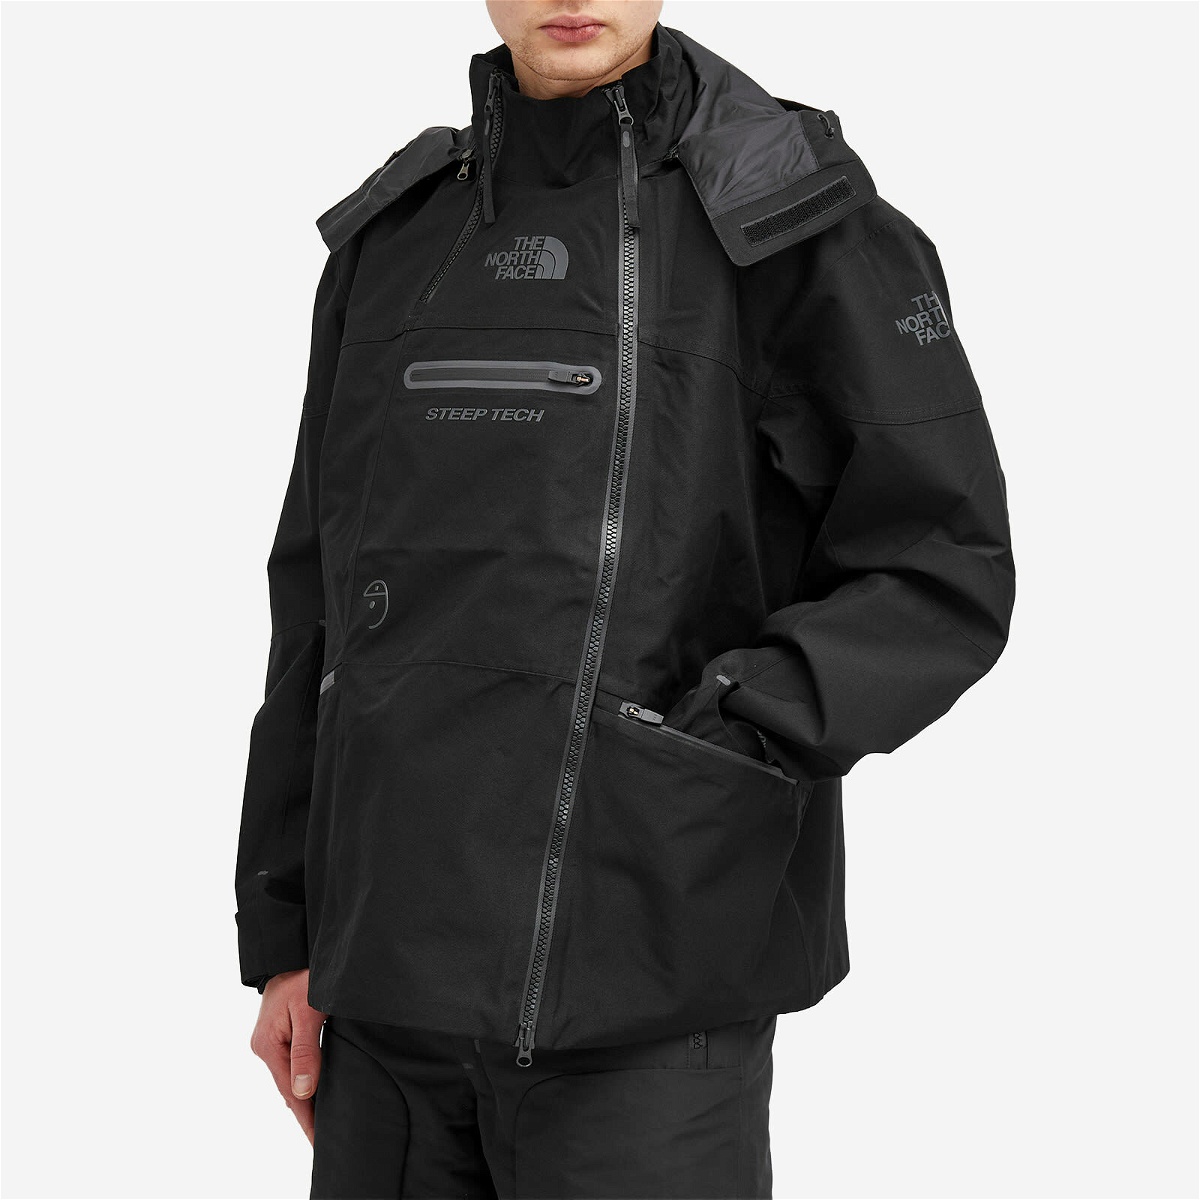 The North Face Men's Remastered Steep Tech Gore-Tex Work Jacket in Tnf  Black The North Face